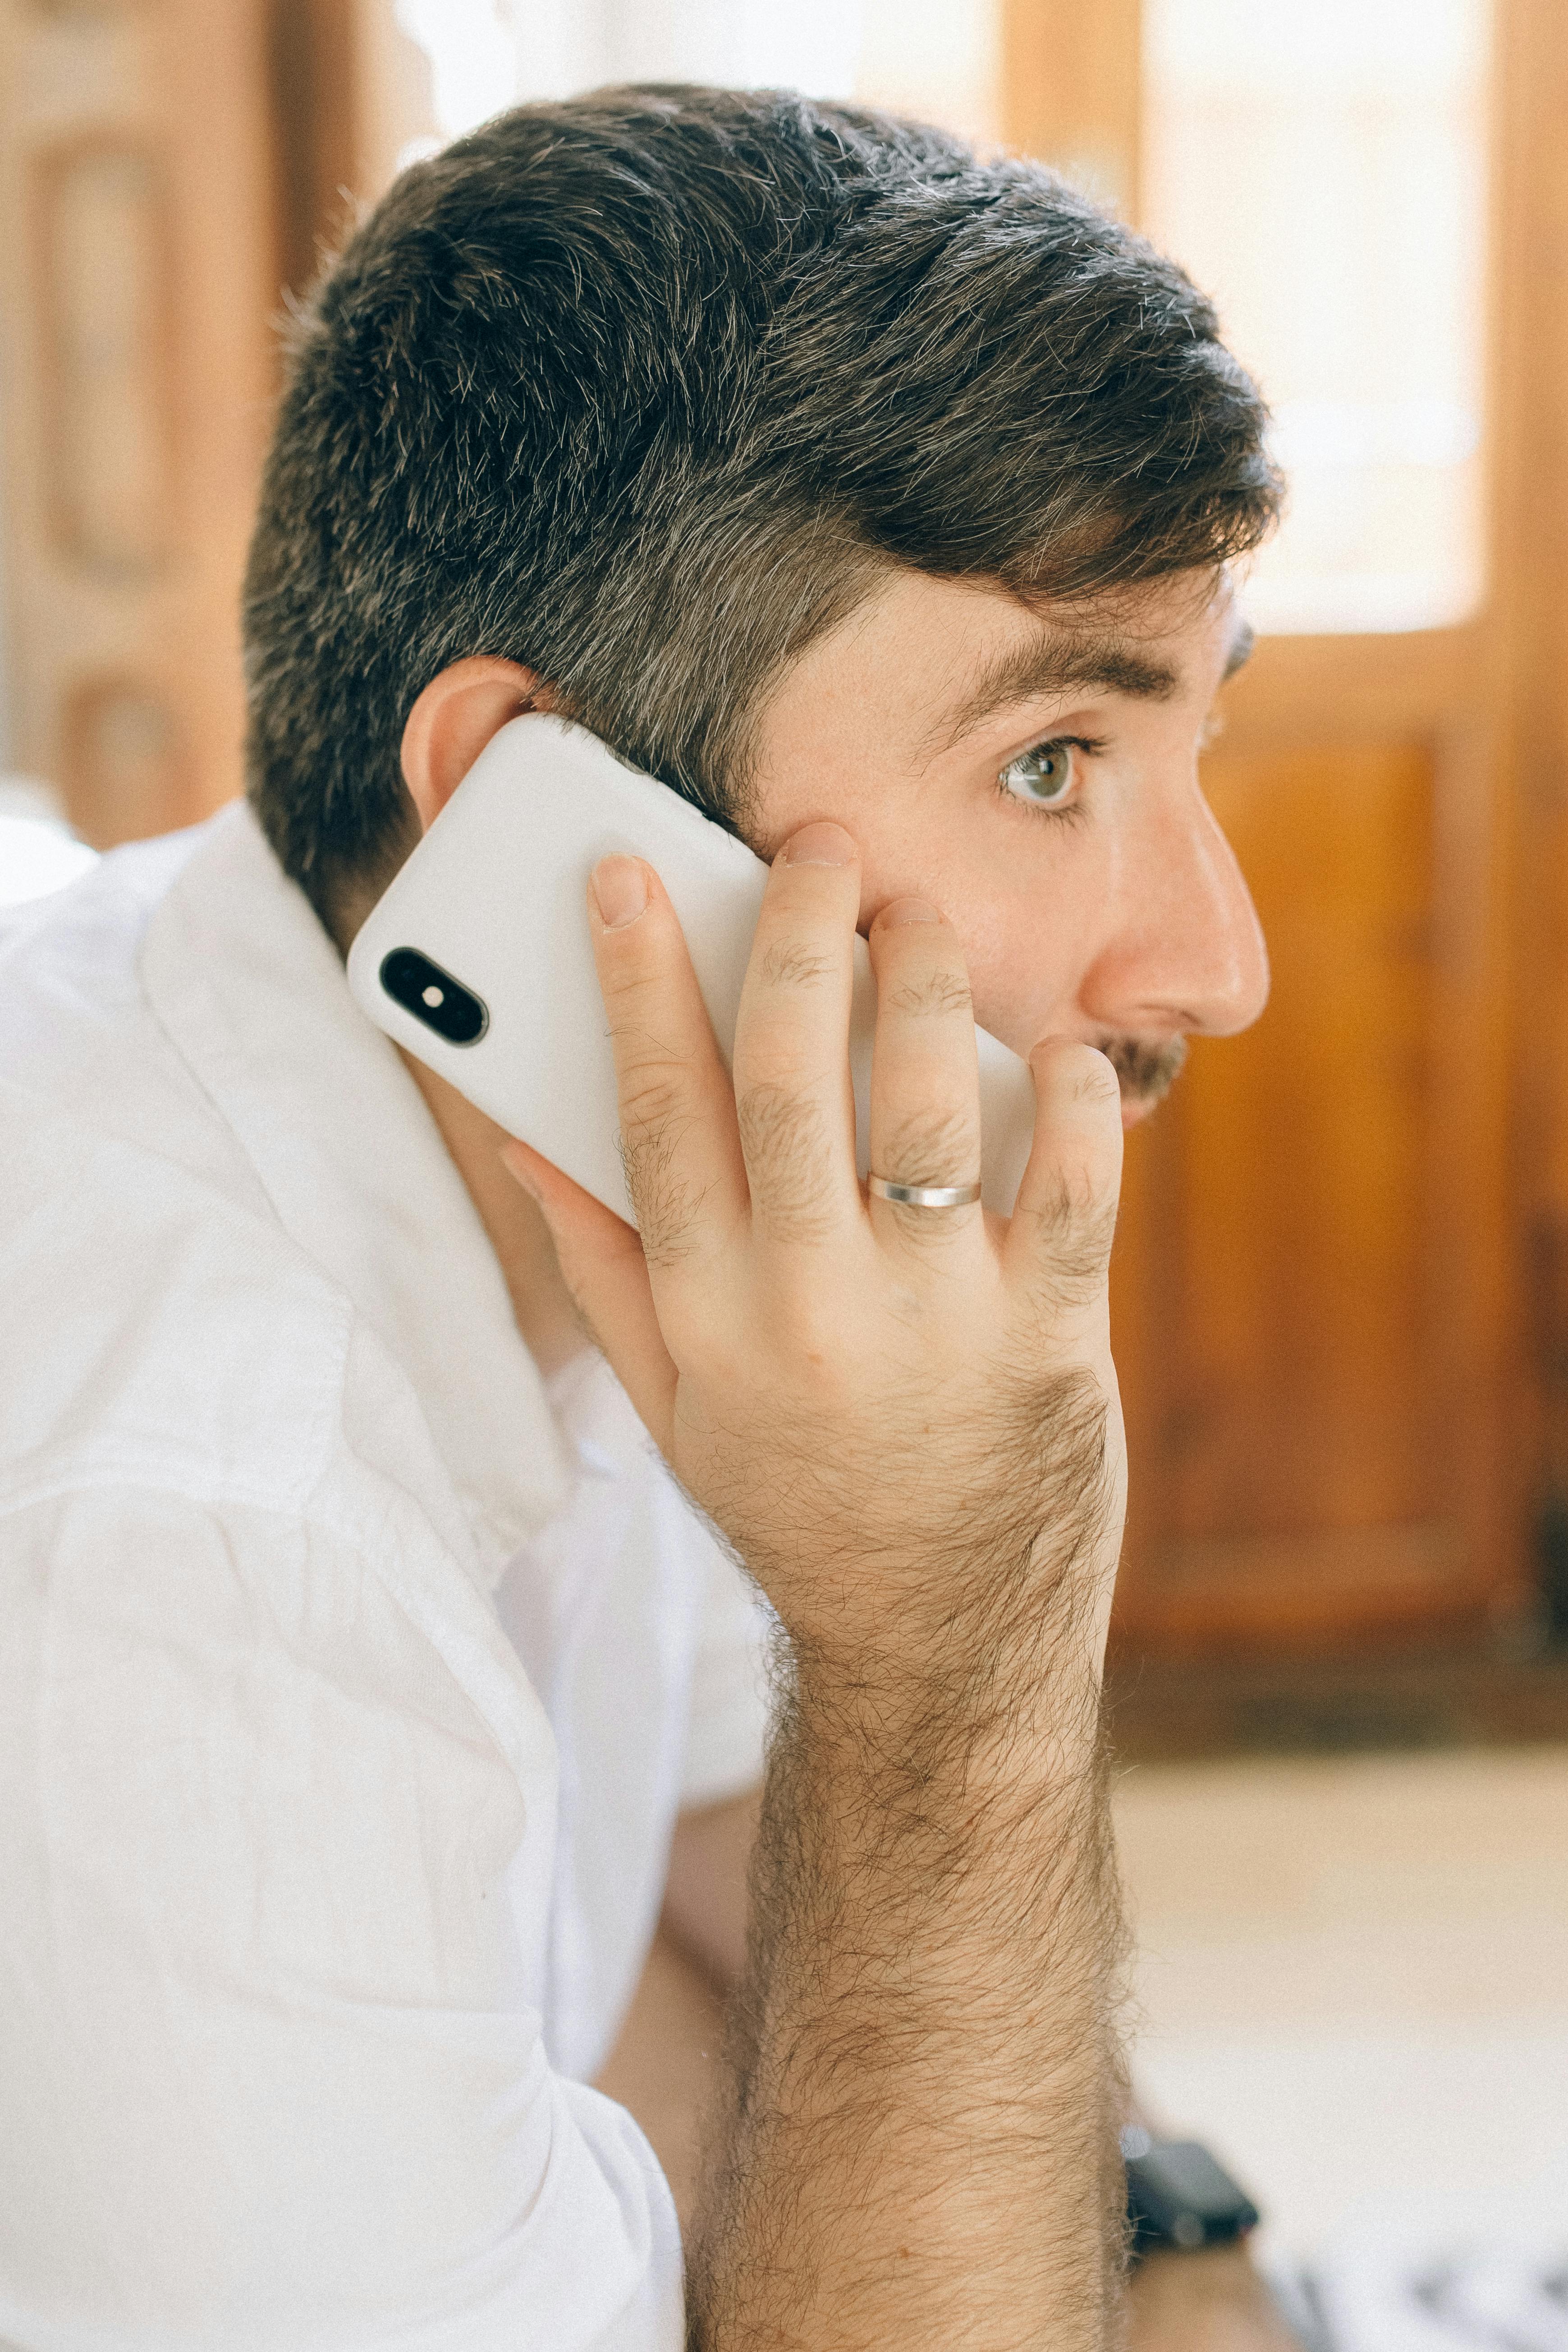 Man talking to his mother on the phone | Source: Pexels